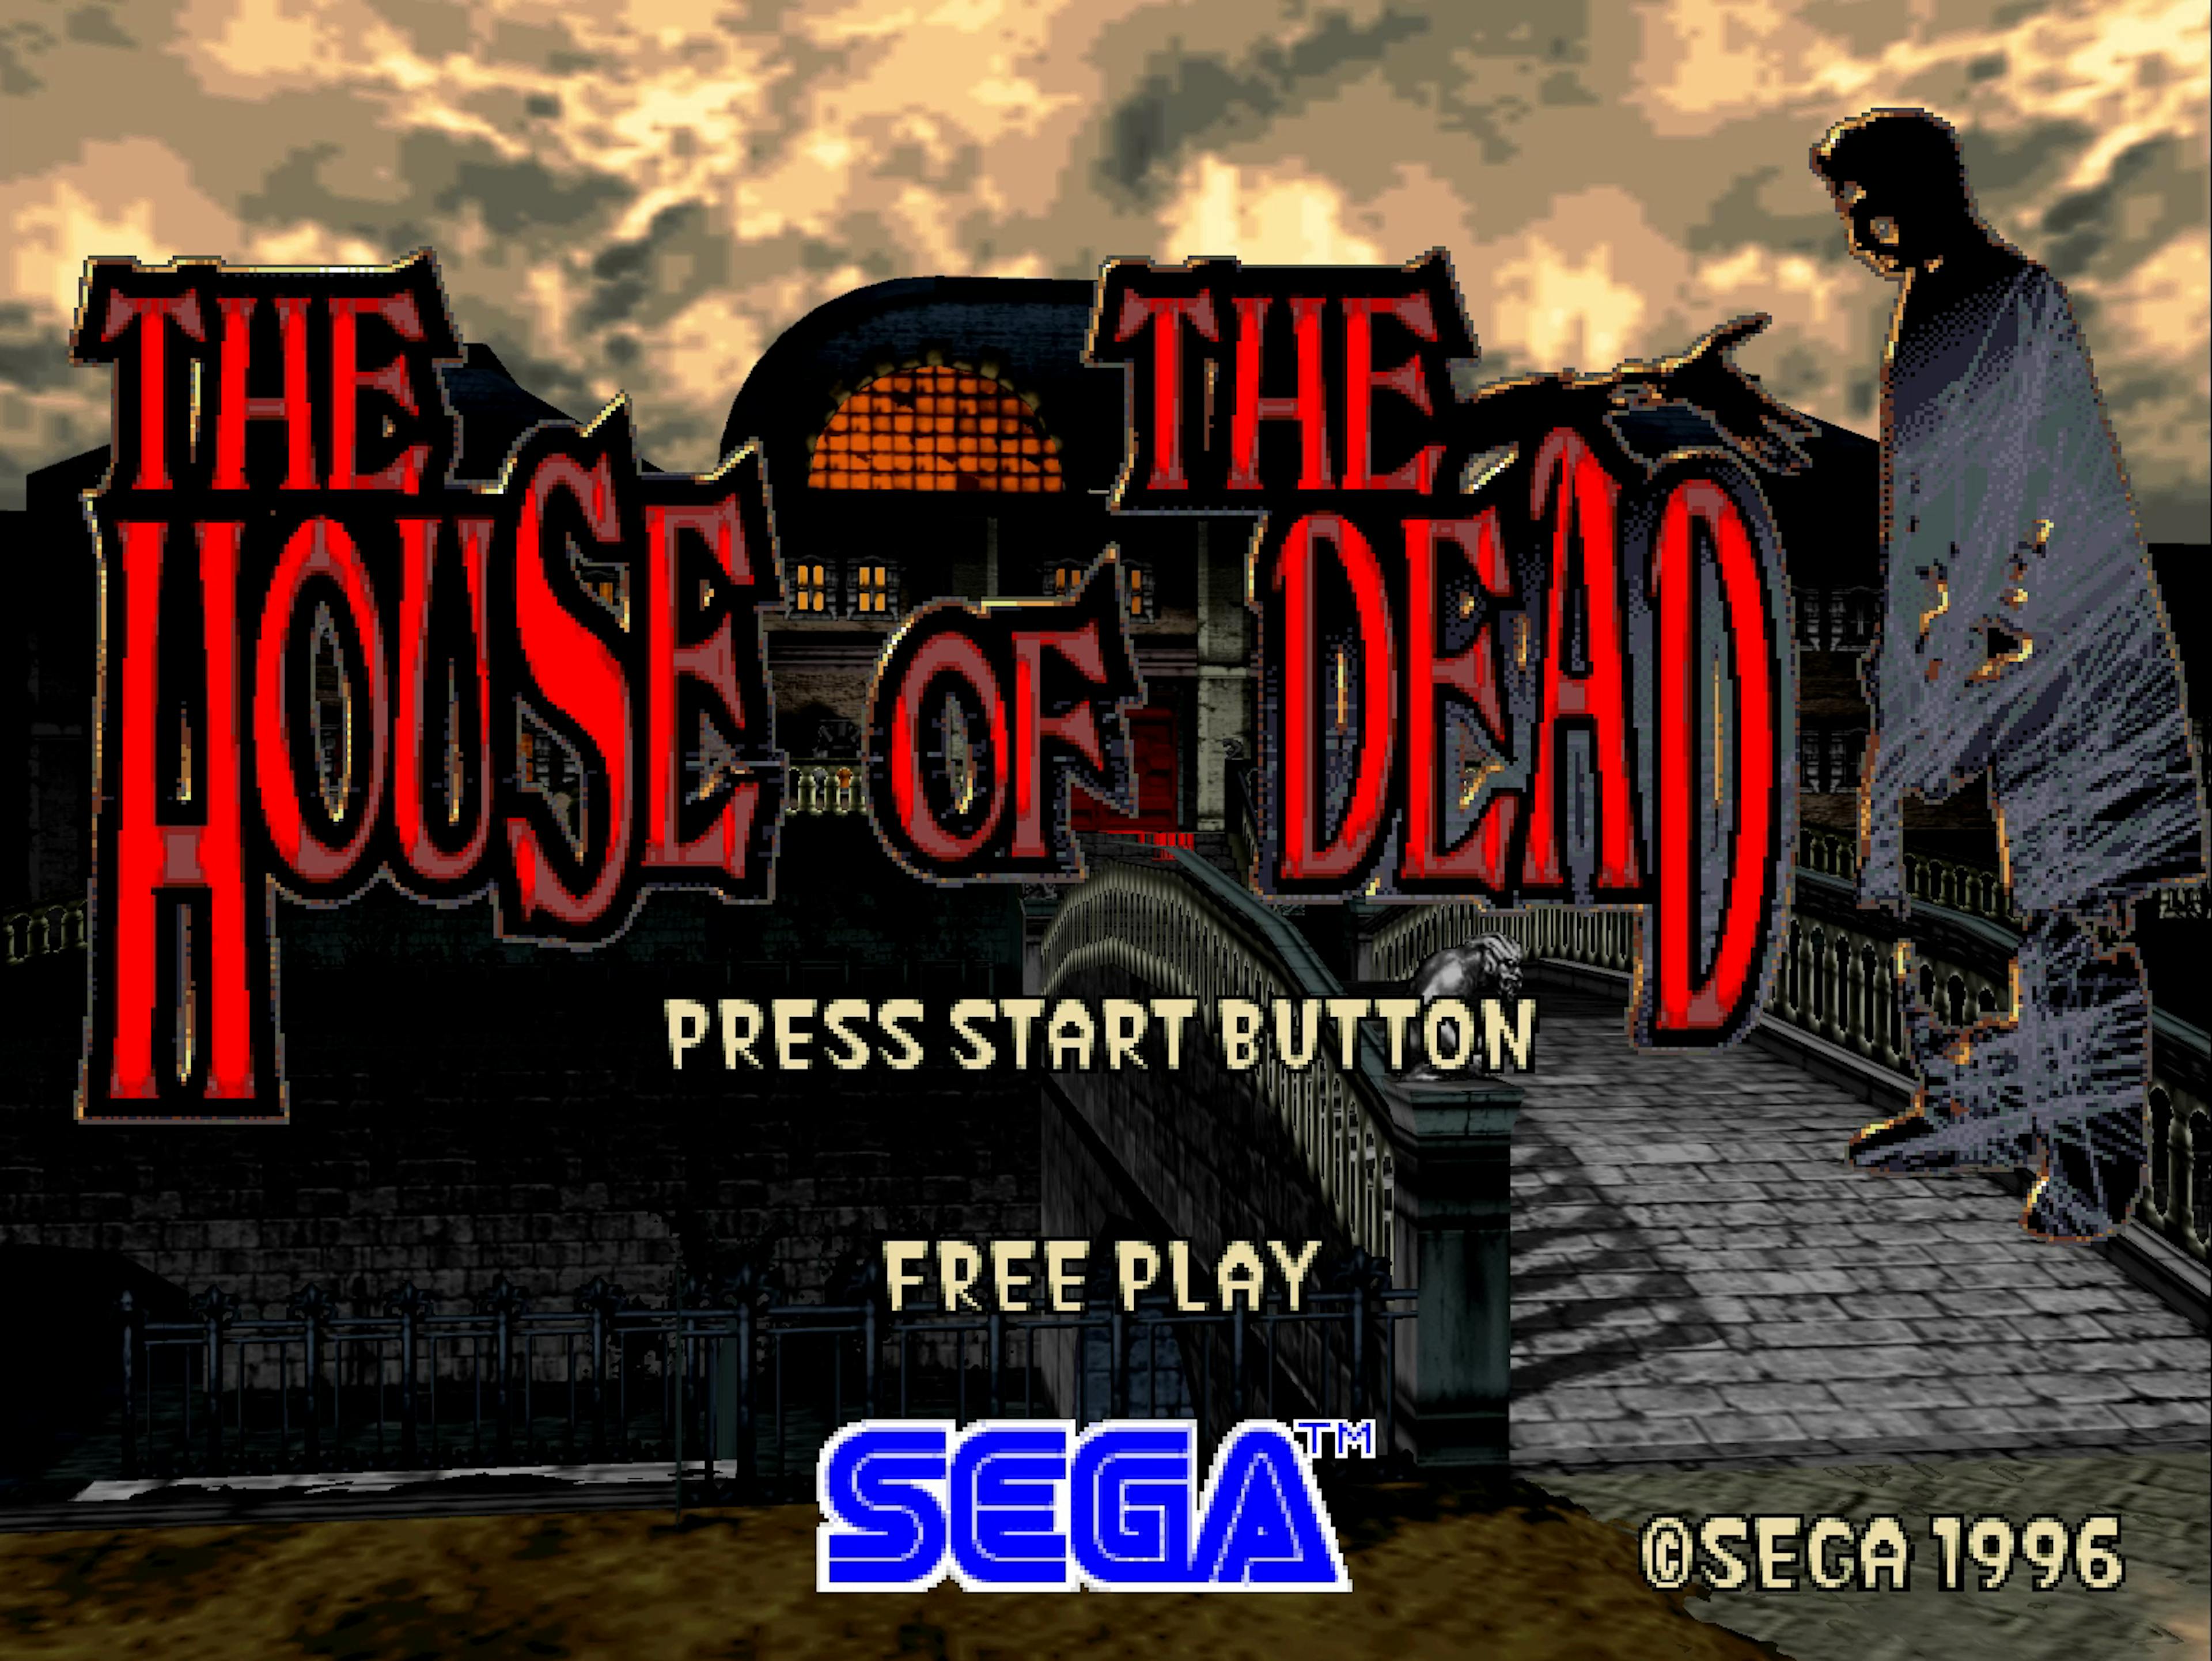 Everyone, say with me now: THE HOUSE... OF THE DEAD.